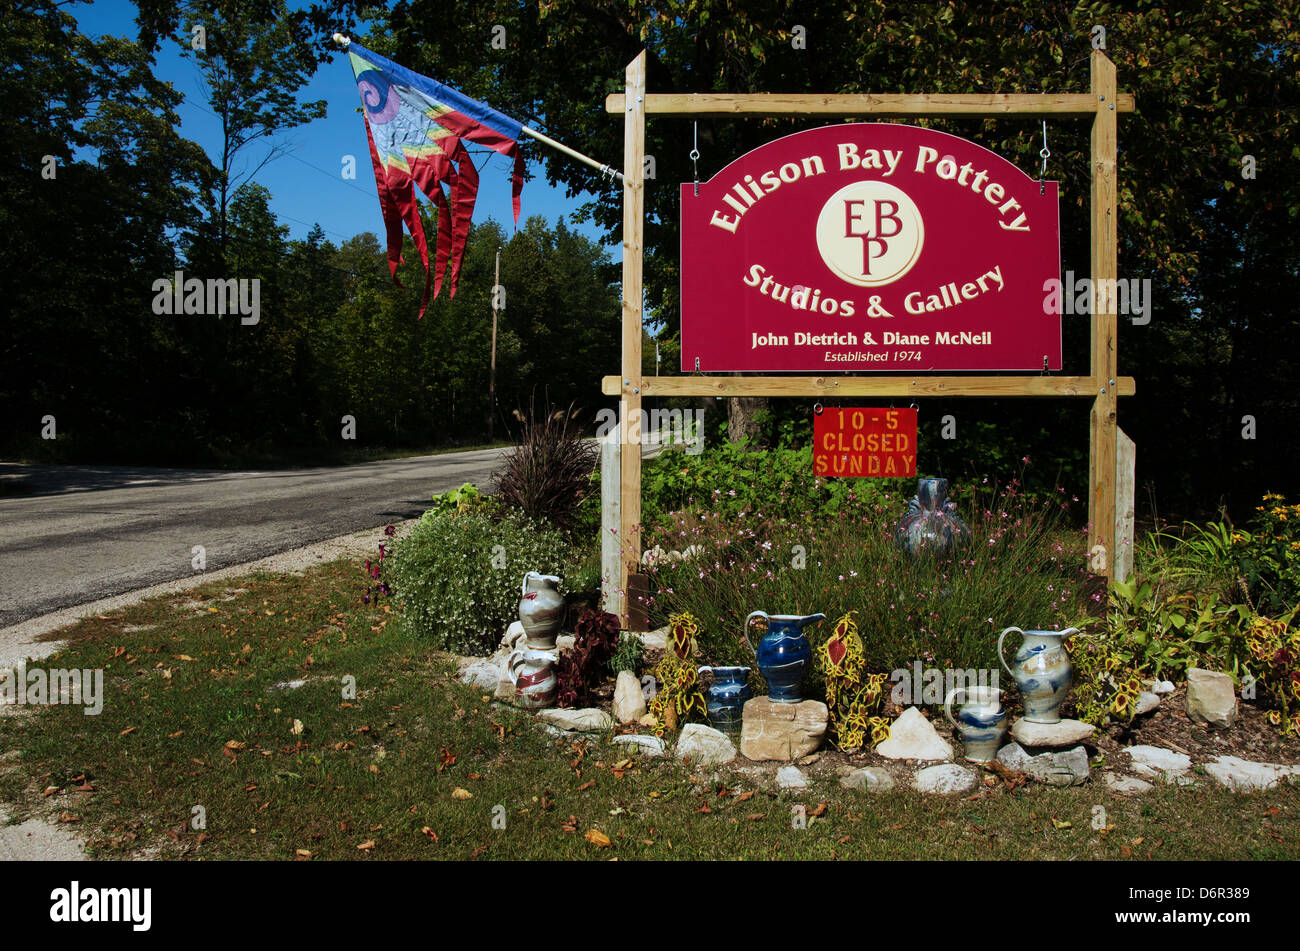 Ellison Bay Pottery is in the Door County town of Ellison Bay, Wisconsin which is known for its pottery and craft shops. Stock Photo